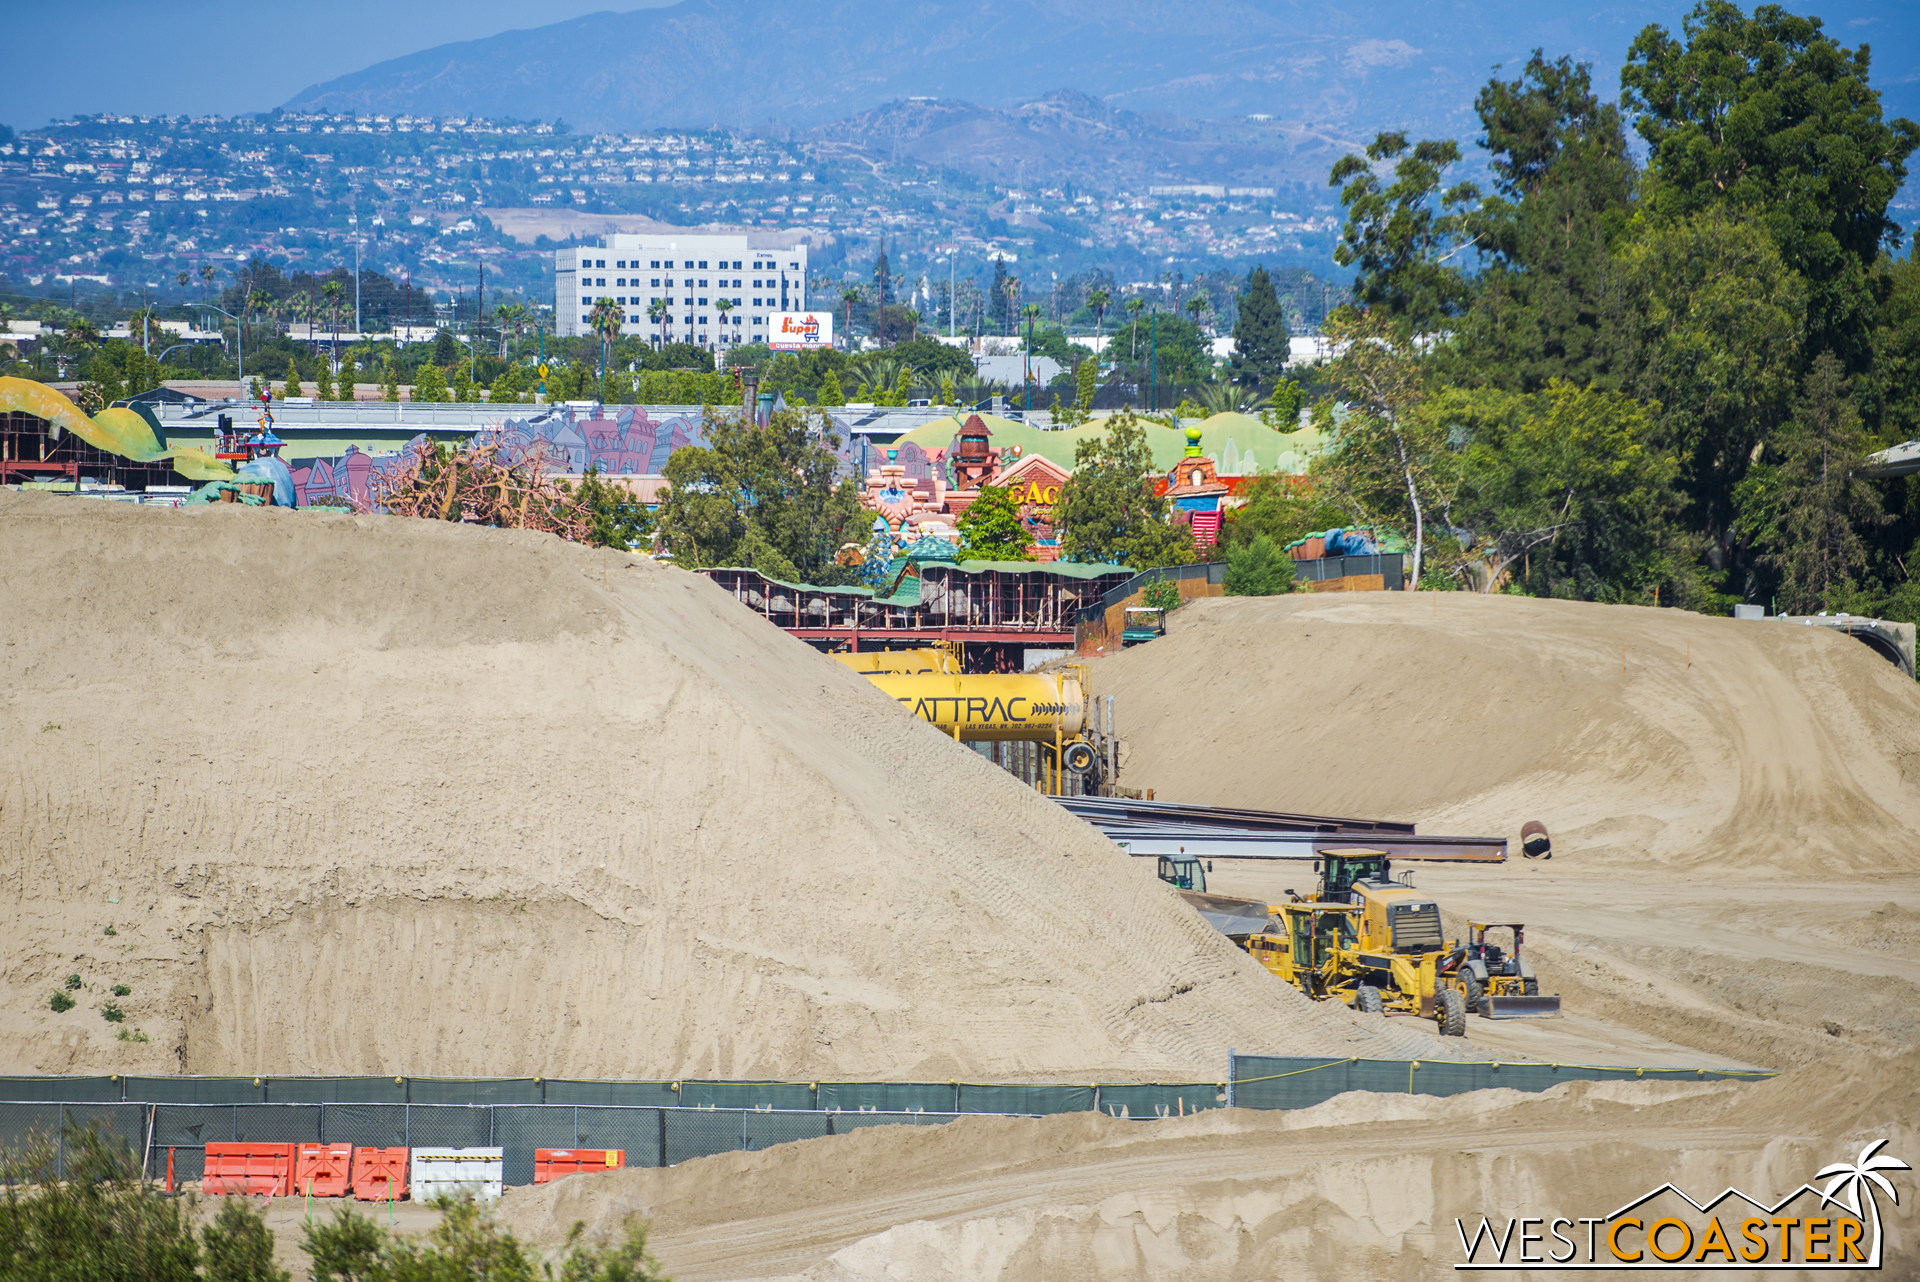  A closer look at the berm provides some scale.&nbsp; It's basically behind and to the west of Mickey's Toontown and appears to correspond to the really tall rockwork in the rendering of "Star Wars" Land that Disney Park Blogs released last week--the